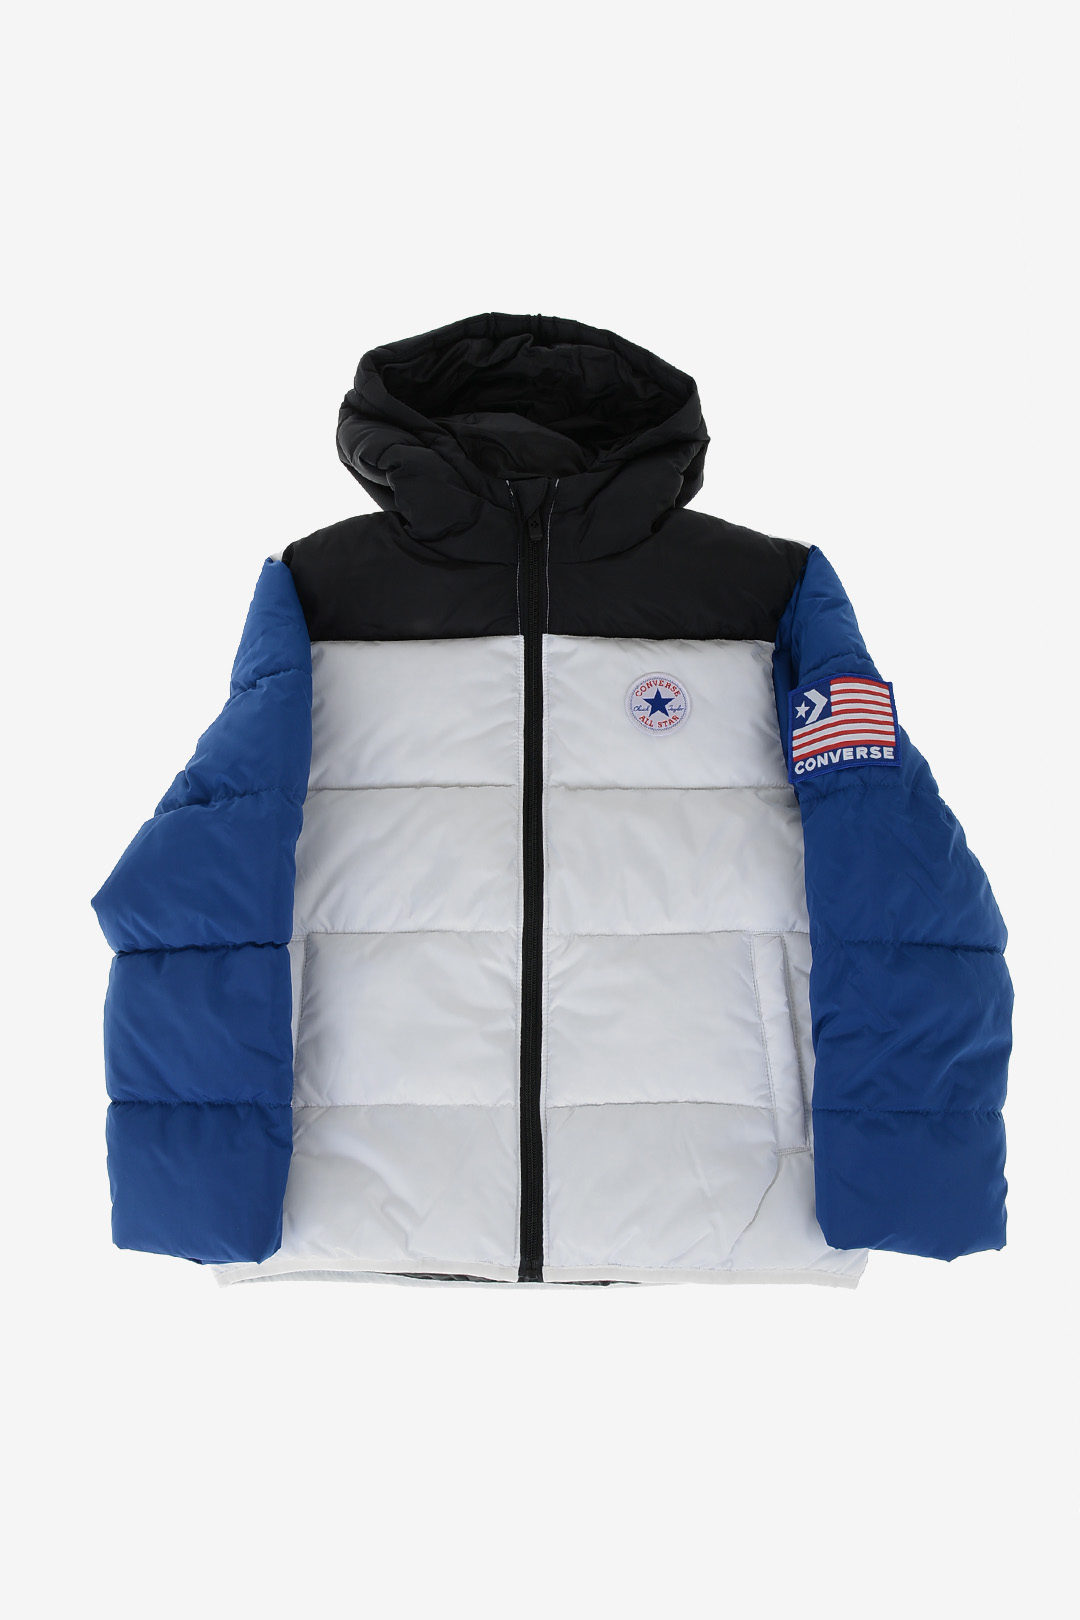 converse boys quilted hooded jacket